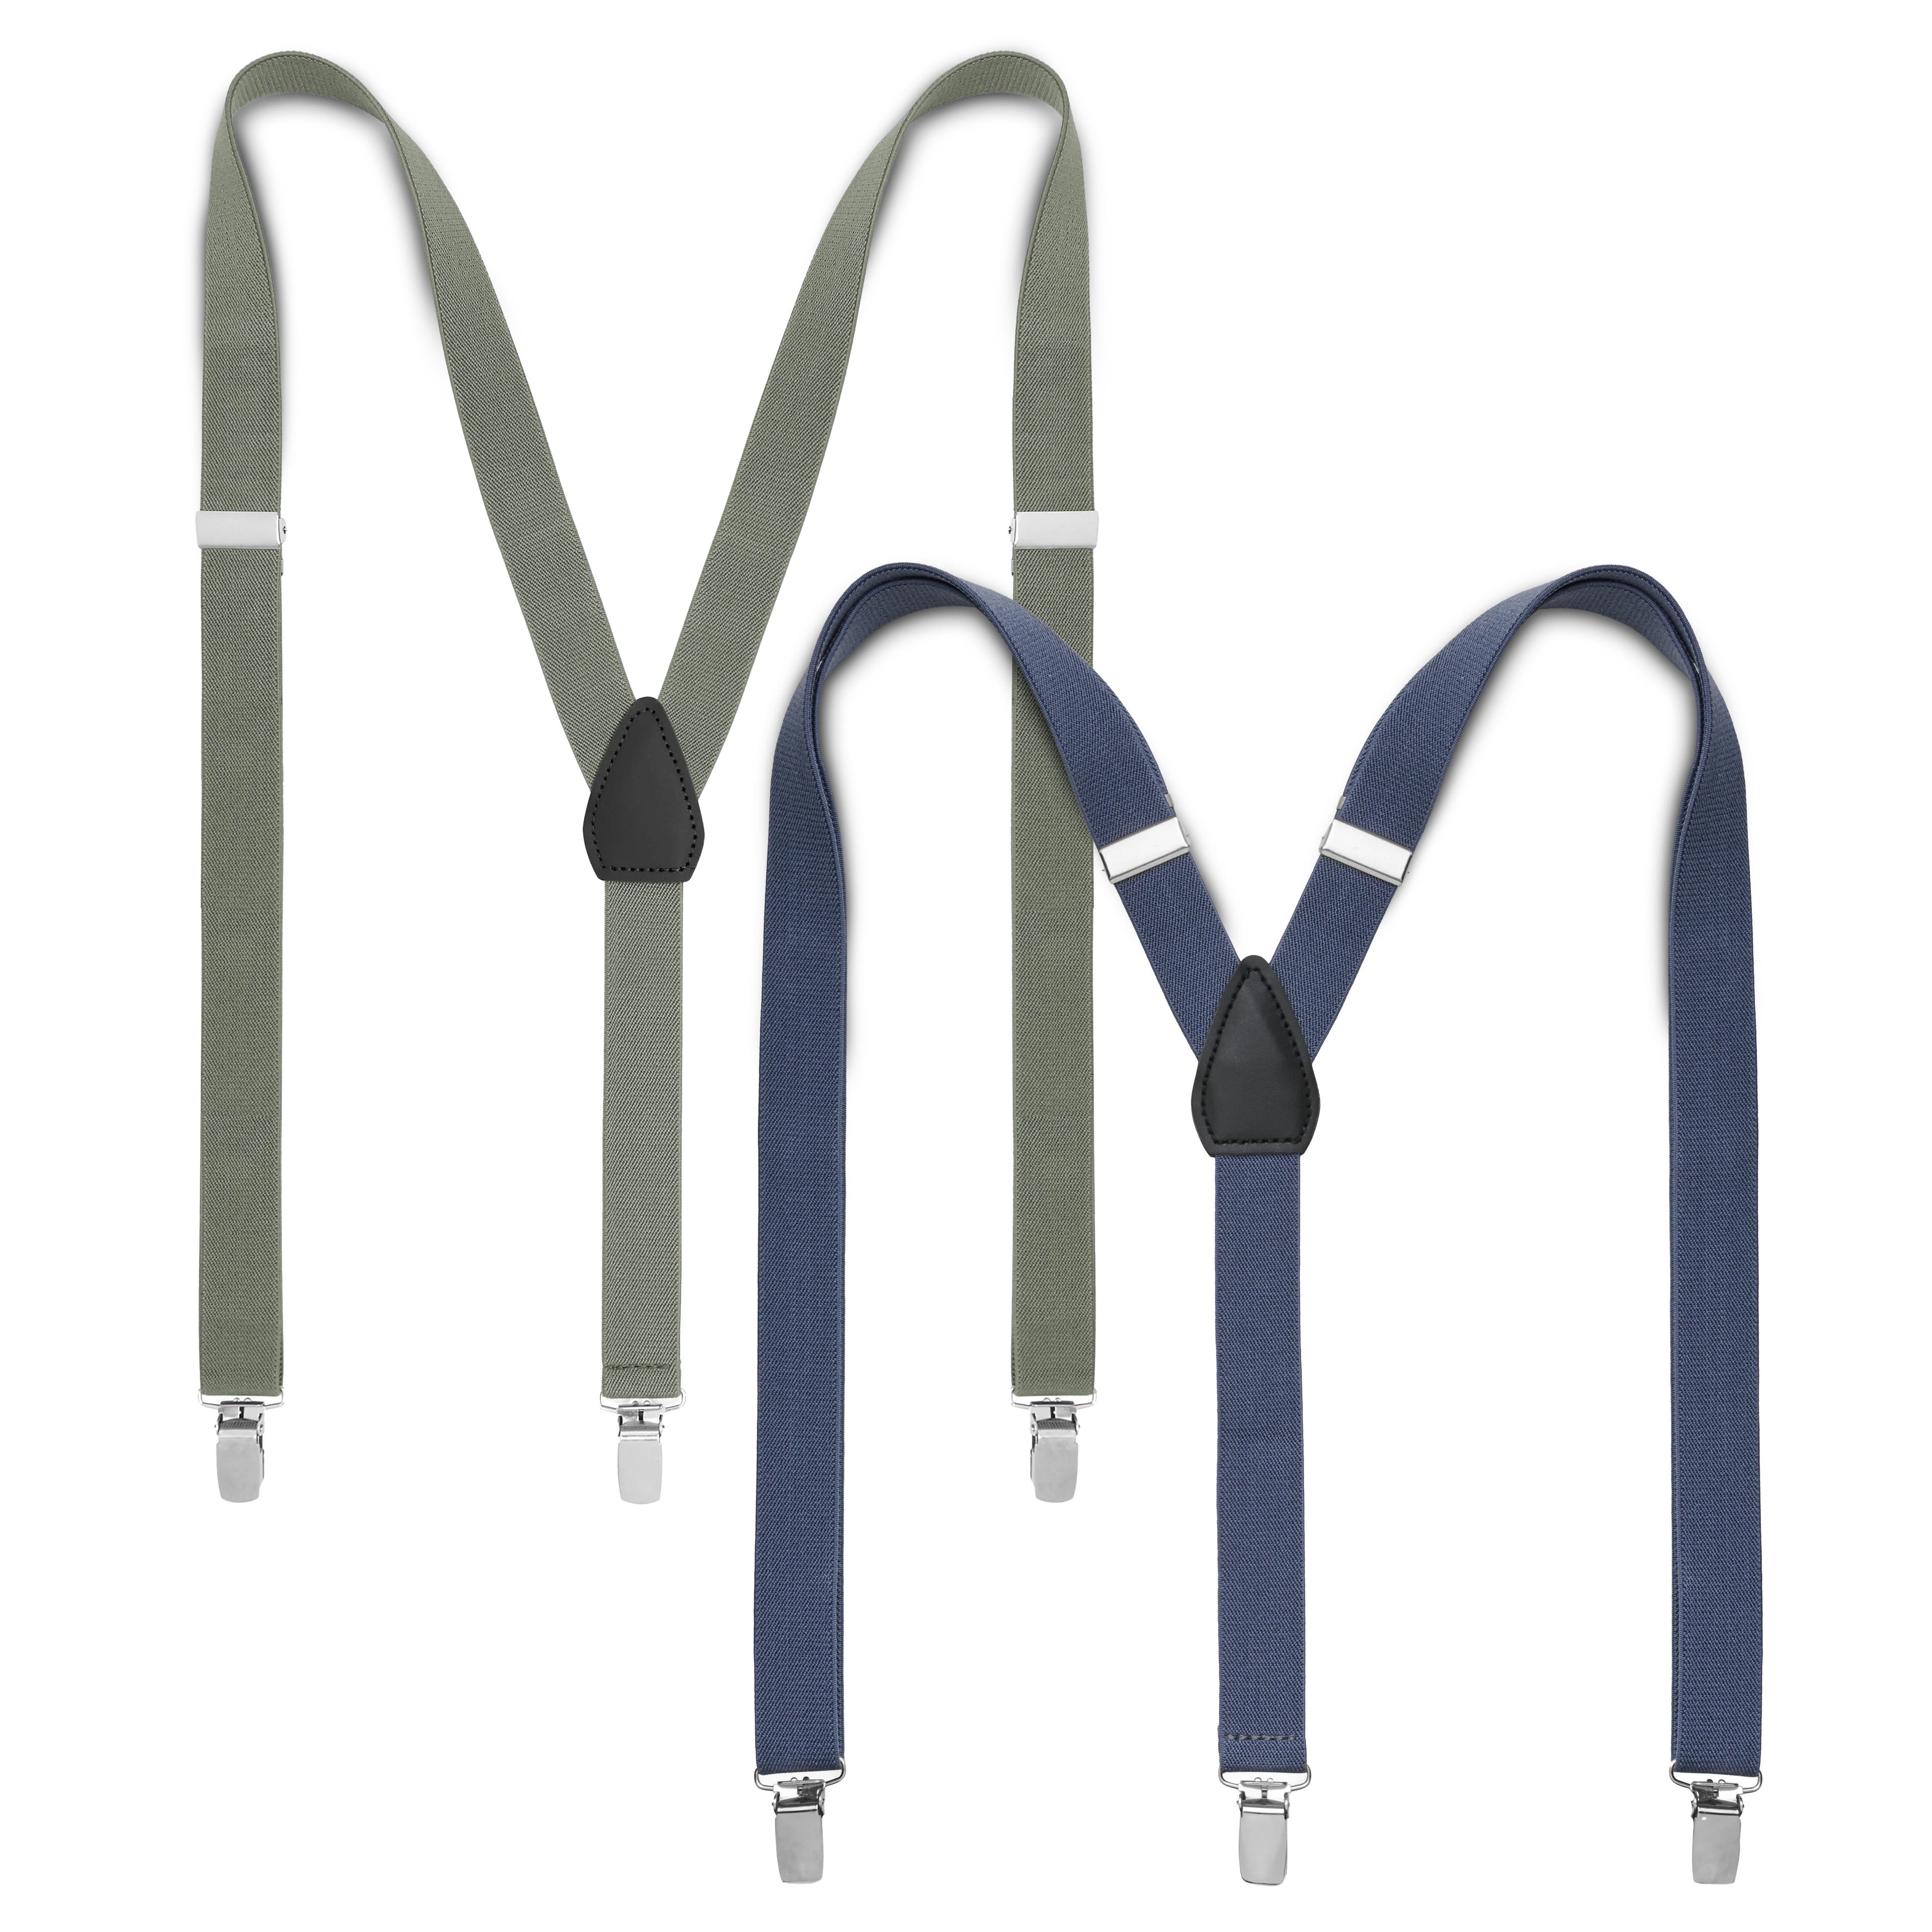 Slim Charcoal and Blue-Grey Clip-On Braces Set